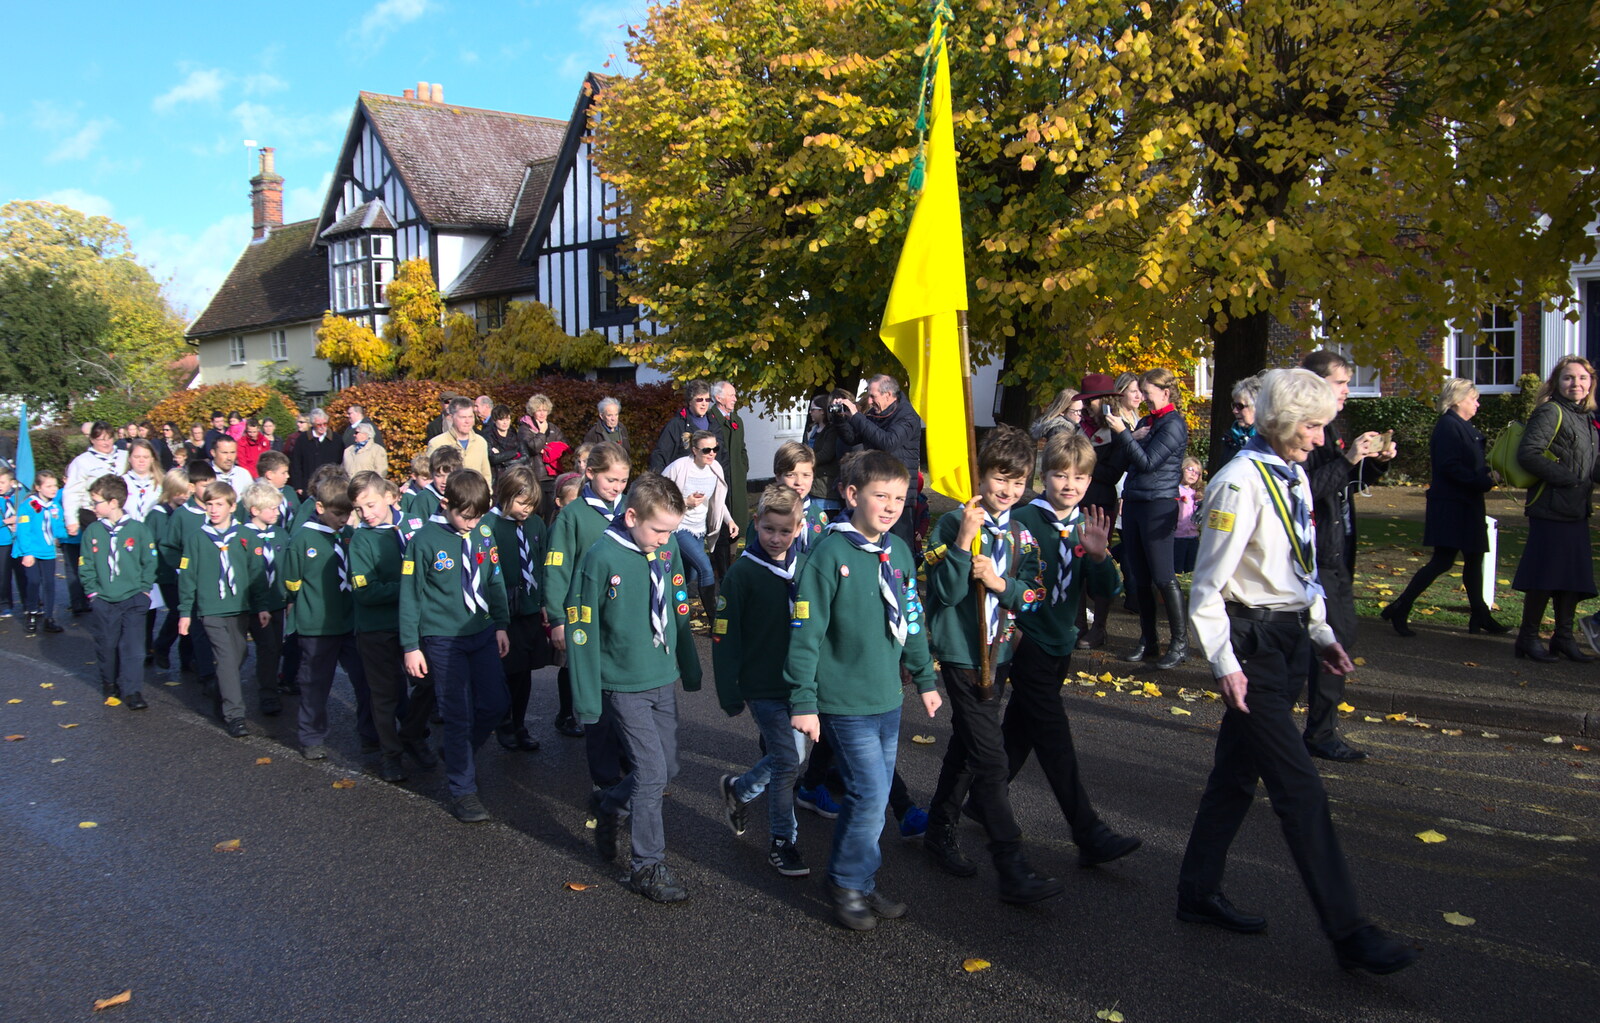 The Scouts from The Remembrance Sunday Parade, Eye, Suffolk - 11th November 2018